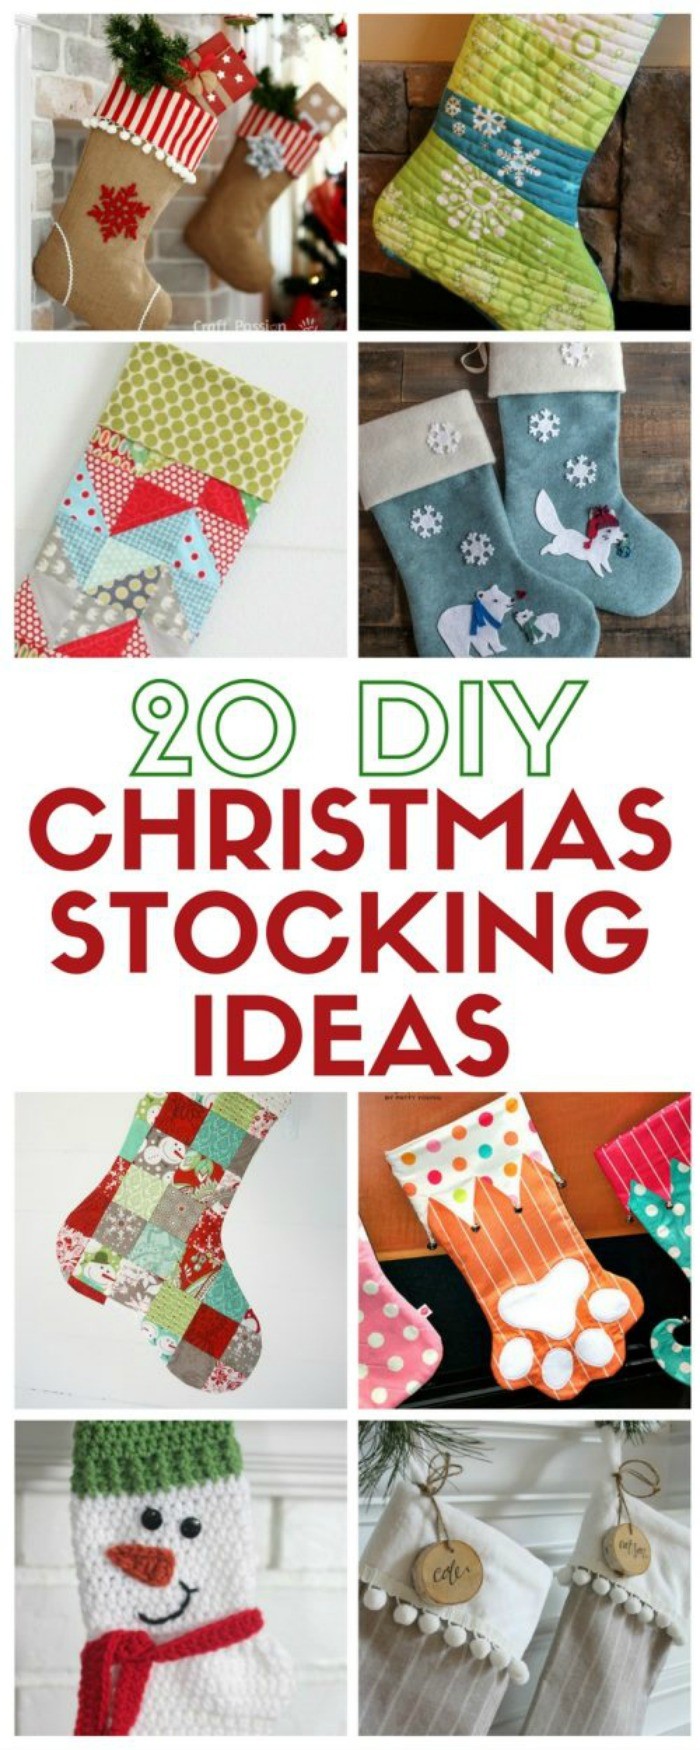 DIY Christmas Stocking Ideas
 The Creative Exchange Link Up Party